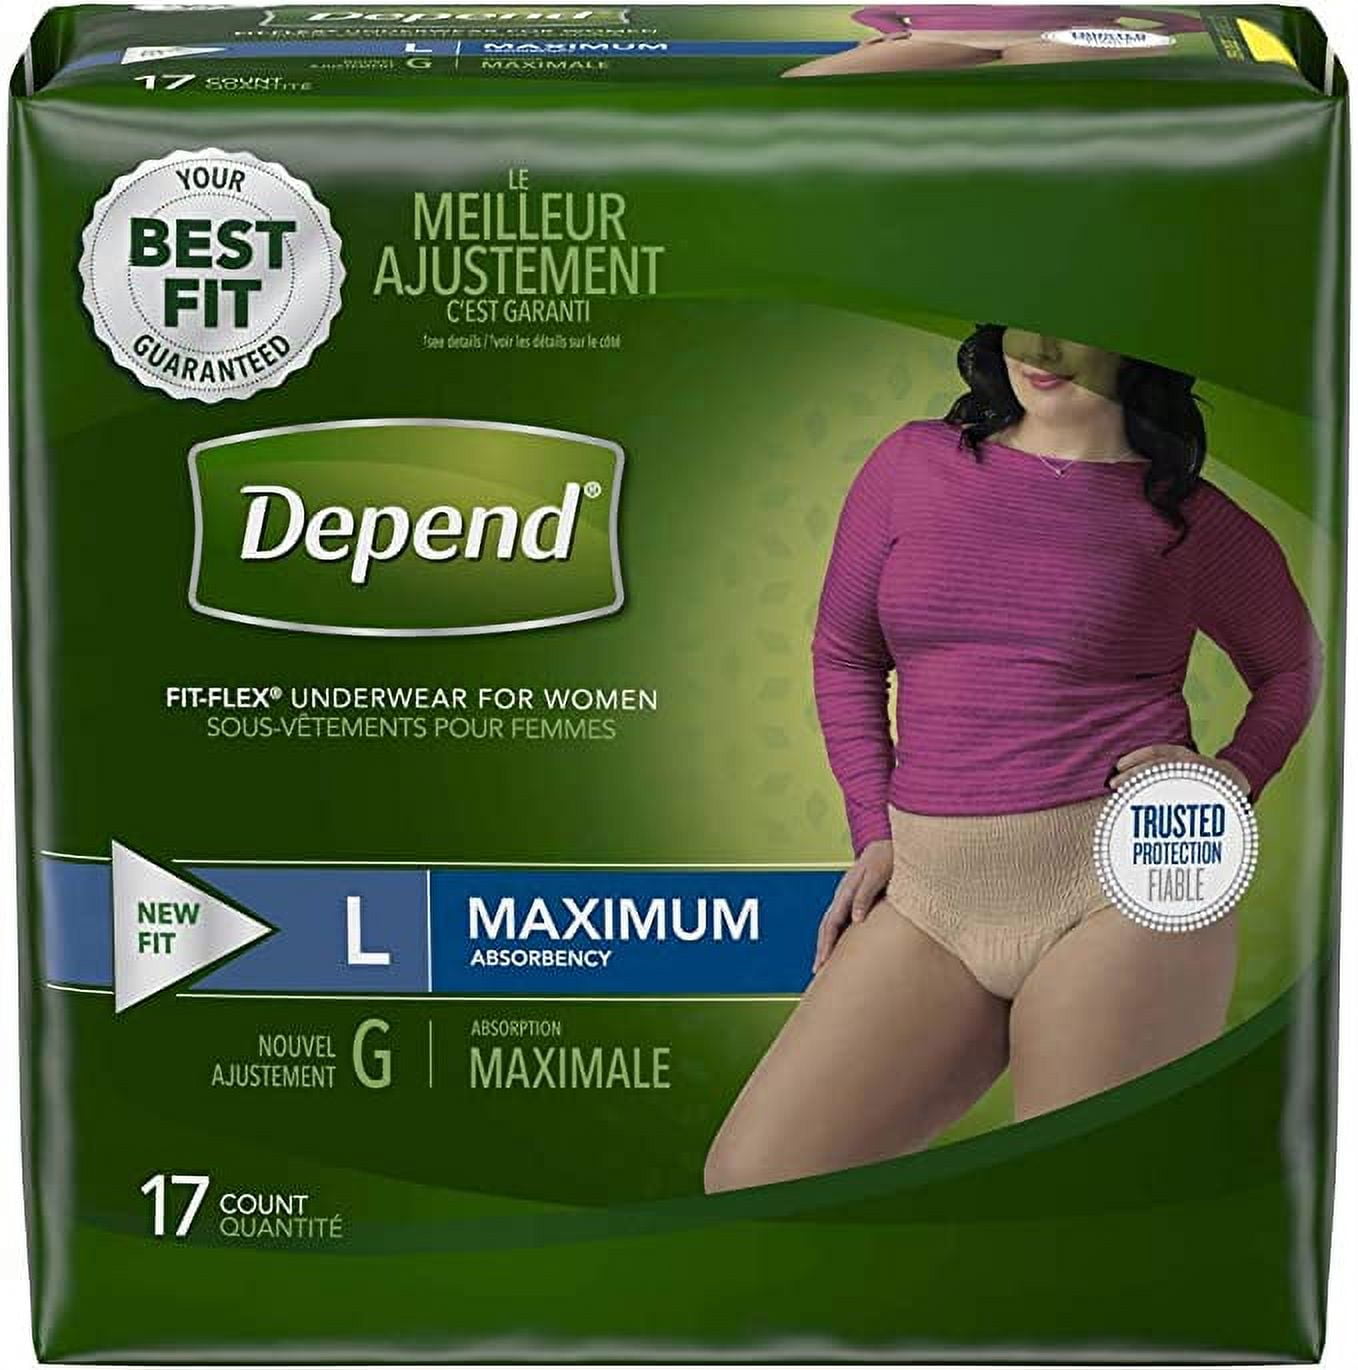  Depend FIT-Flex Incontinence Underwear for Women, Disposable,  Maximum Absorbency, Large, 40 Count : Health & Household